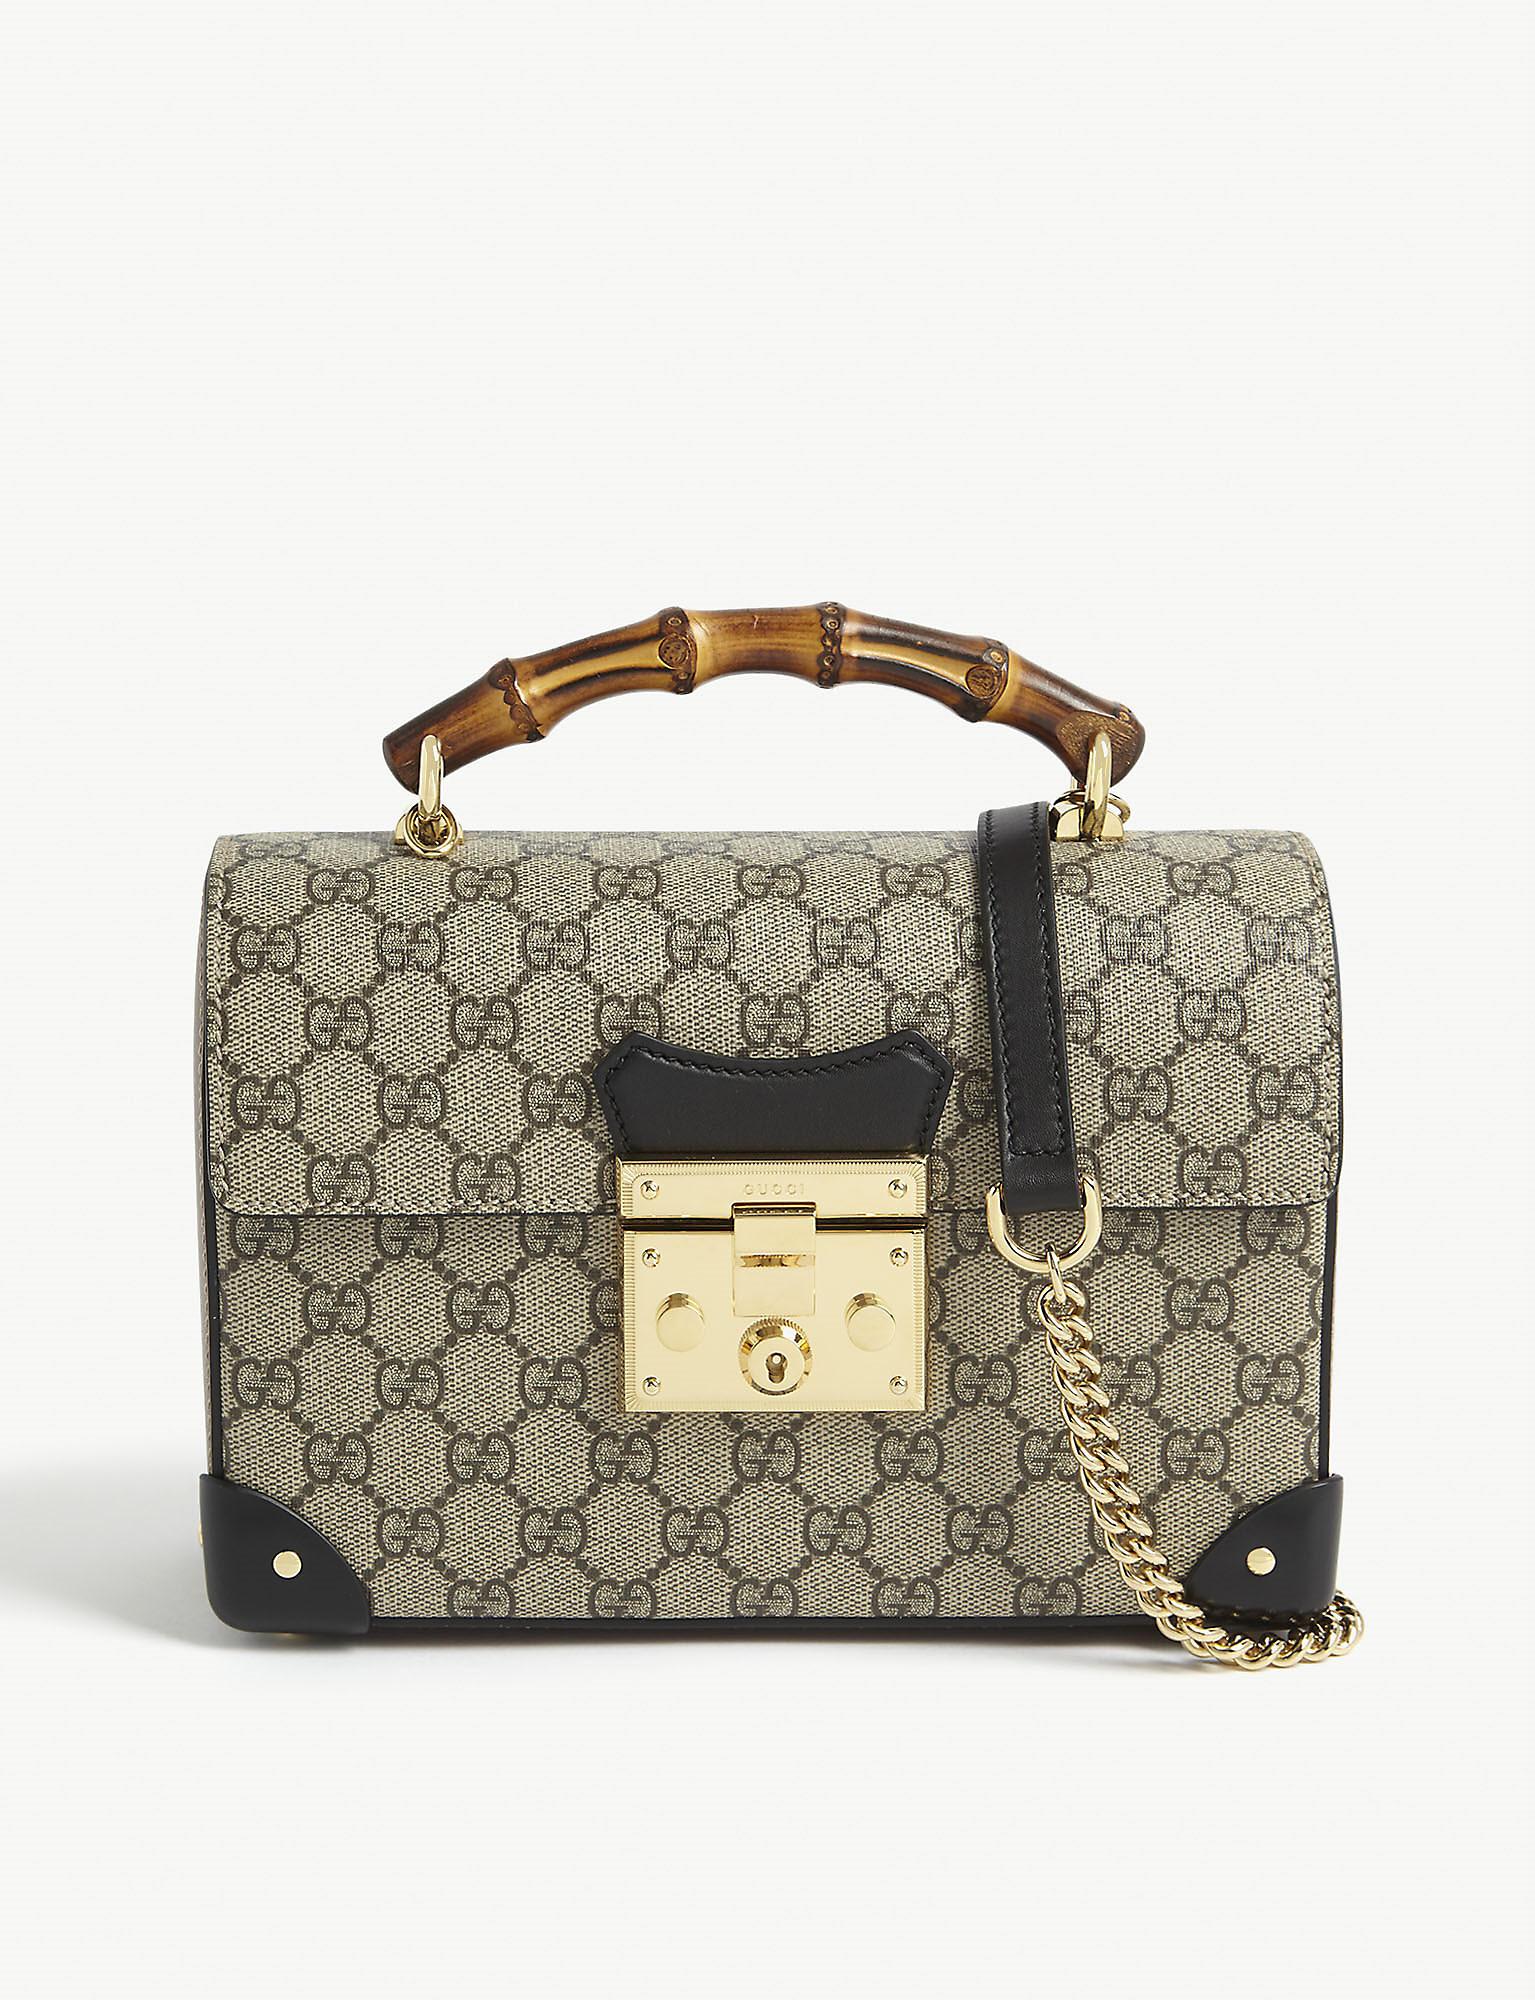 Gucci Canvas Padlock GG Small Bamboo Shoulder Bag in Beige Black